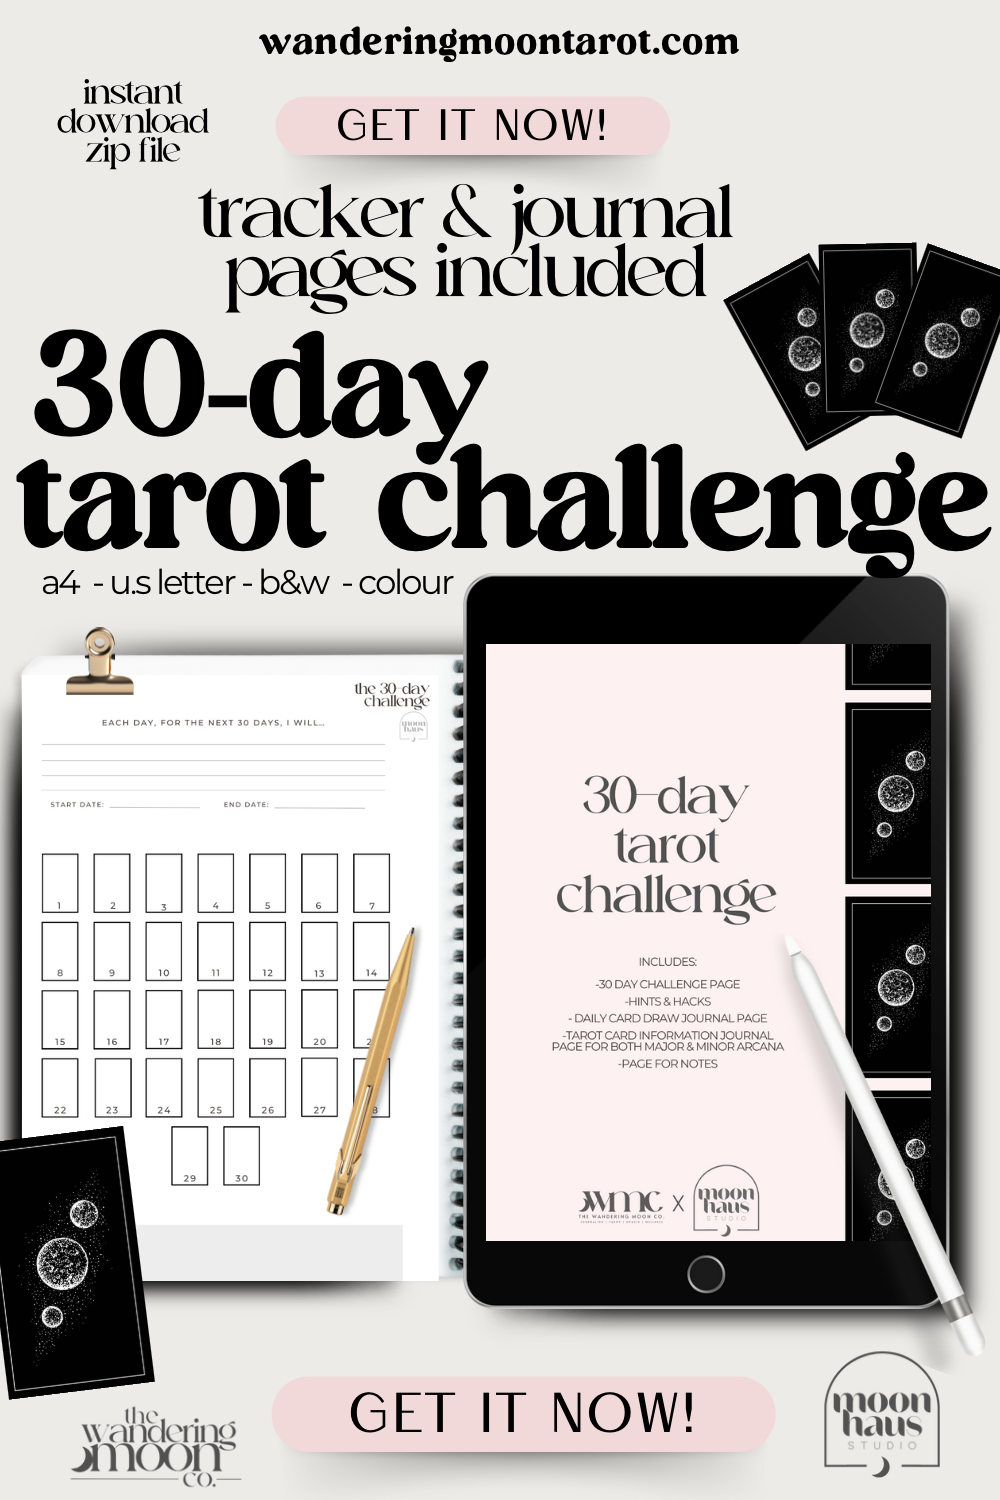 30-day tarot challenge, journal pages & trackers included